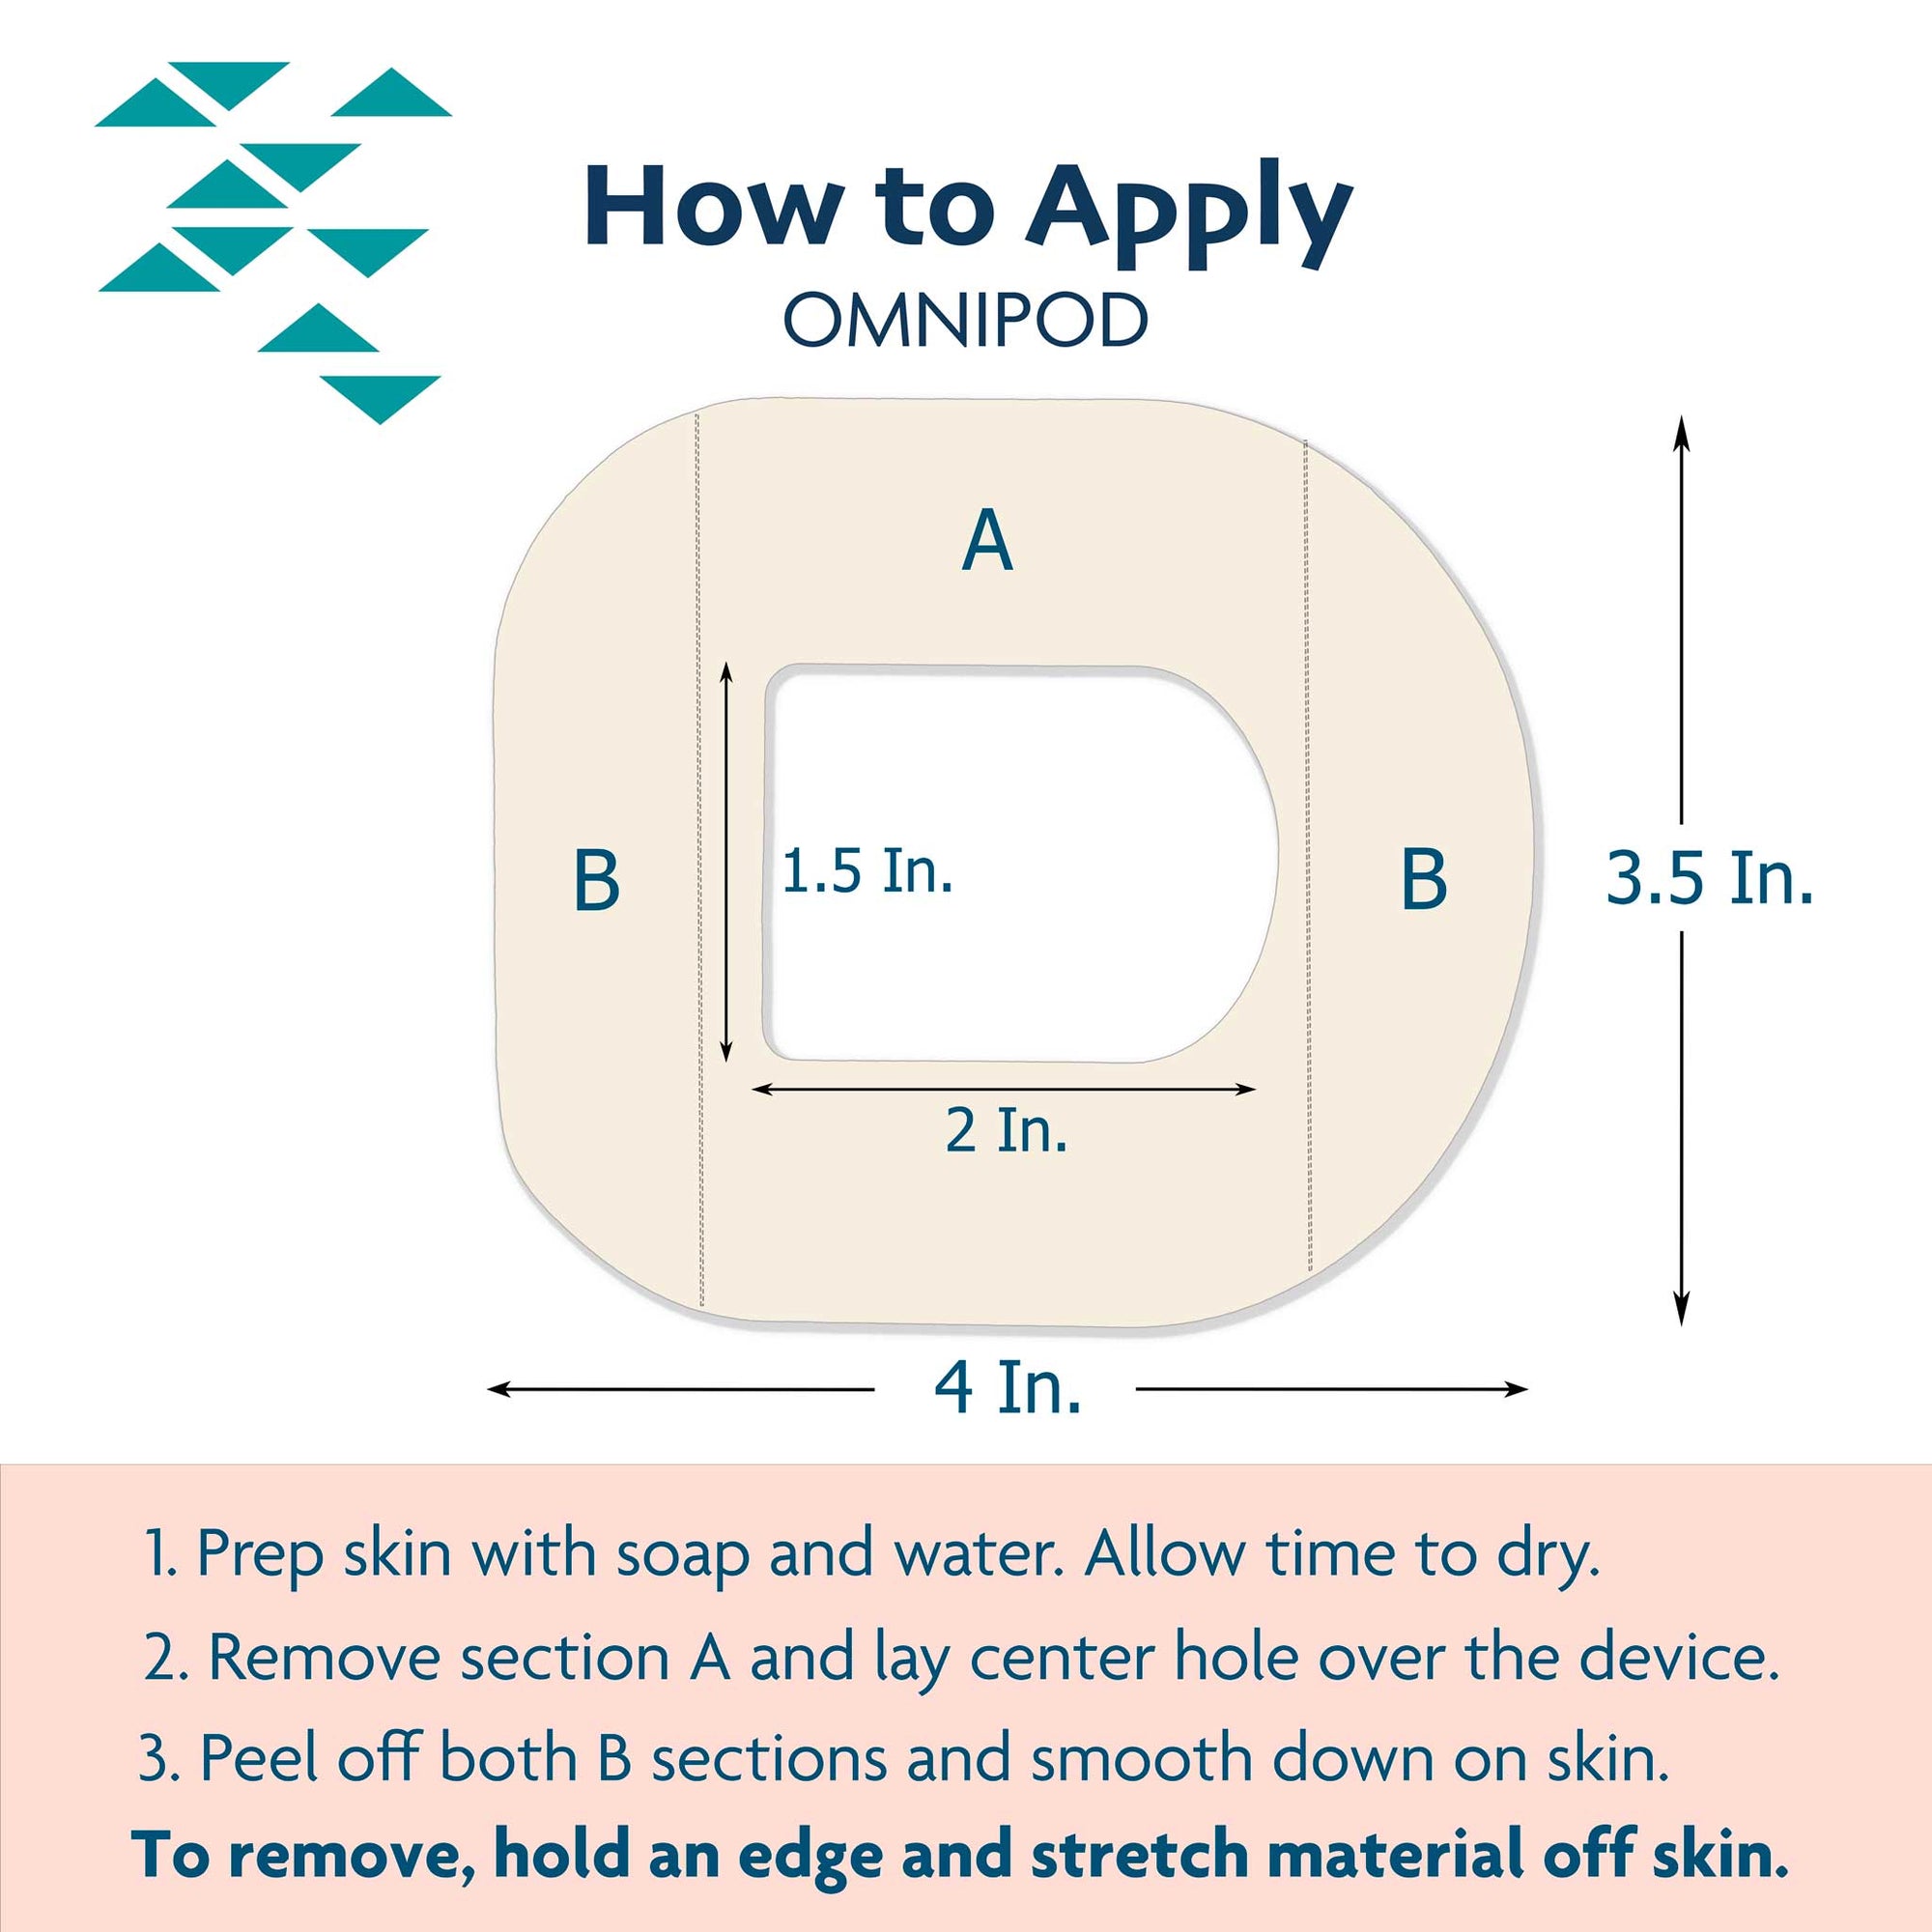 ExpressionMed Tips for proper application of Omnipod Pump adhesive tapes